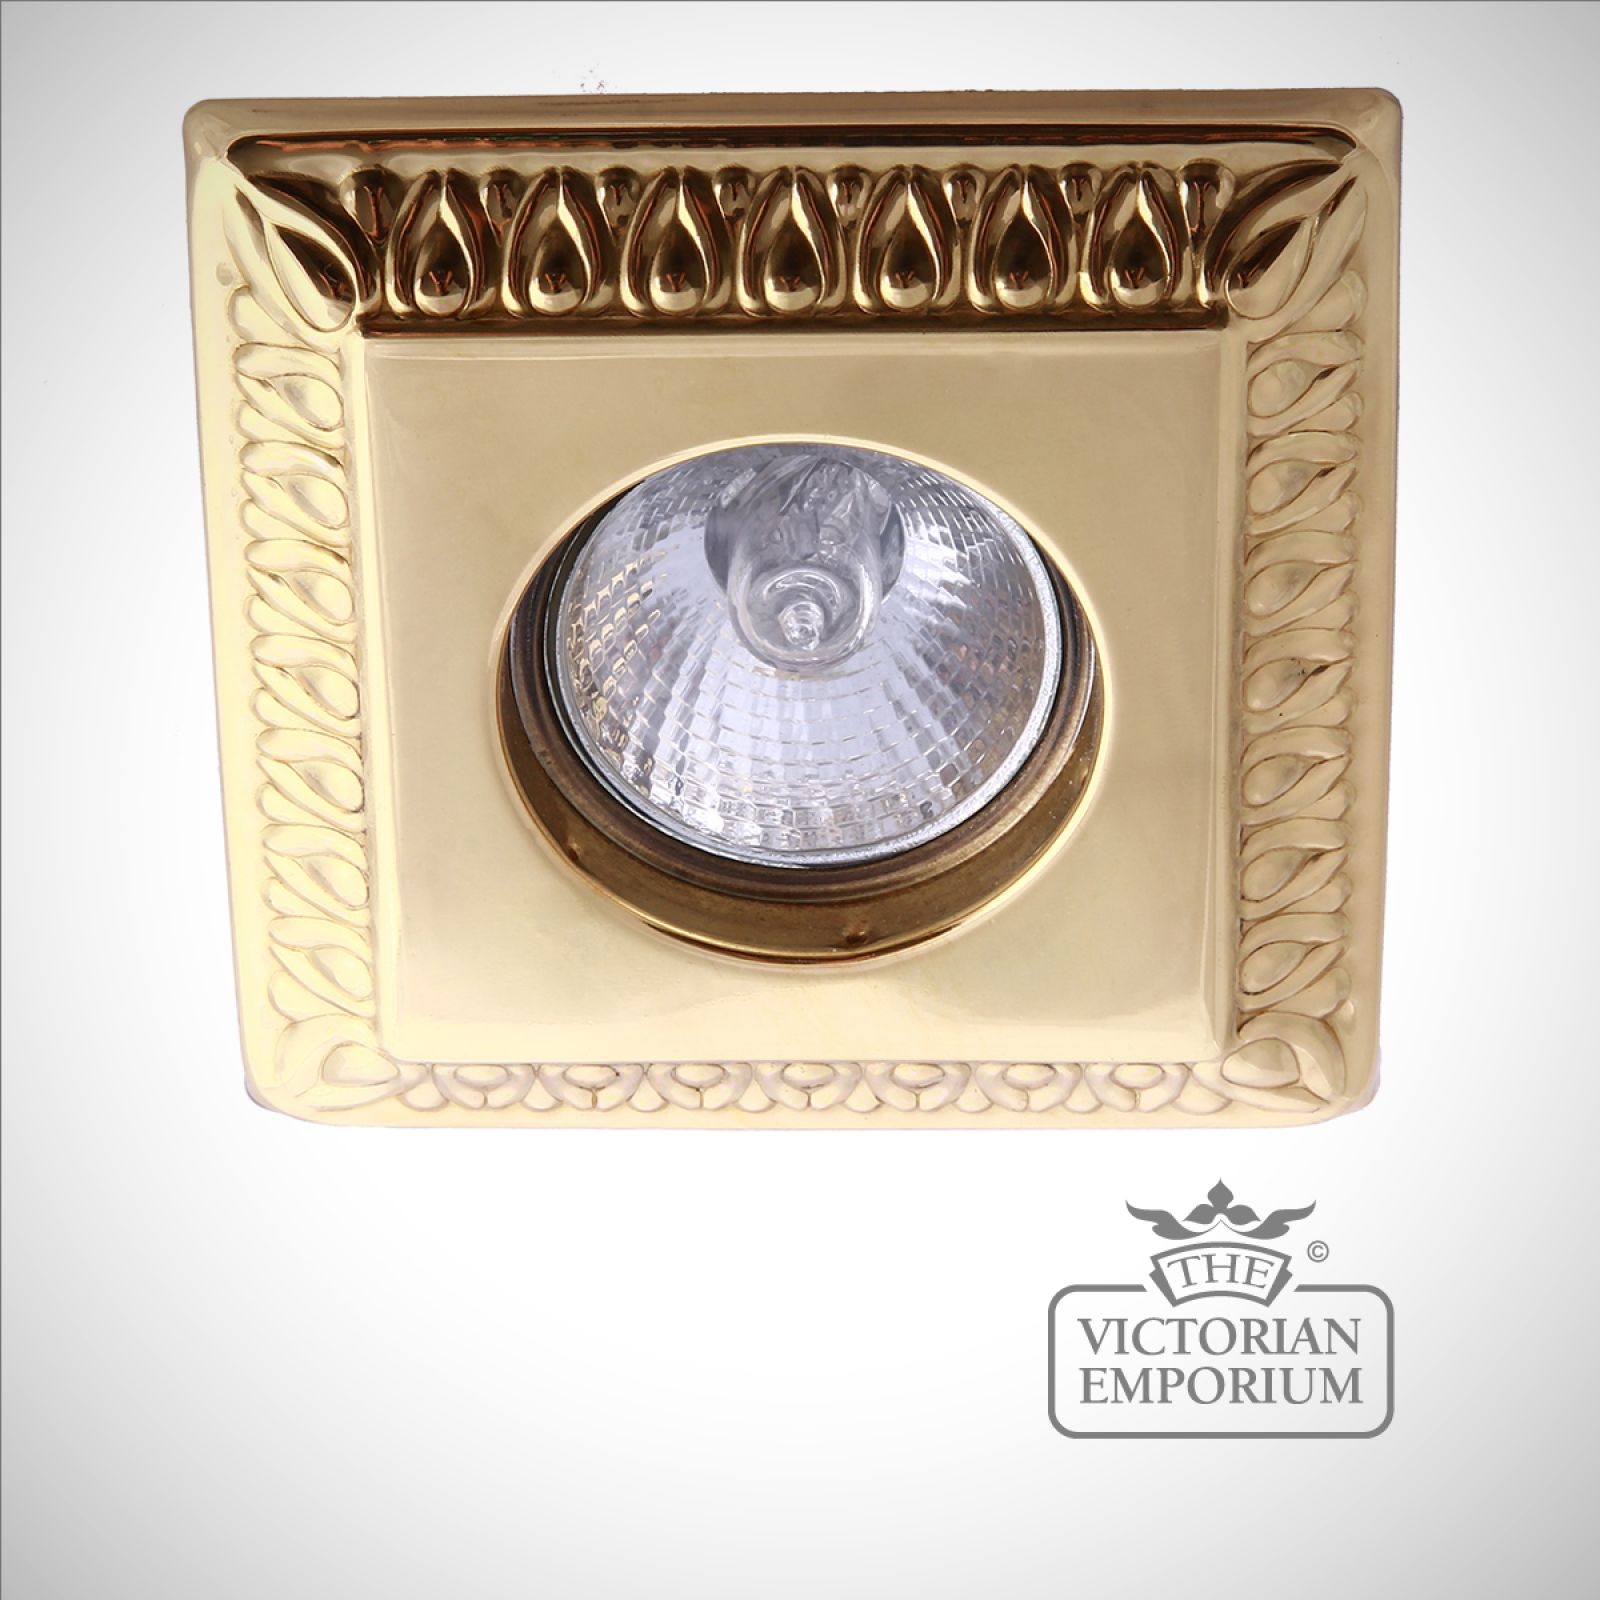 Vada recessed spot light in polished brass